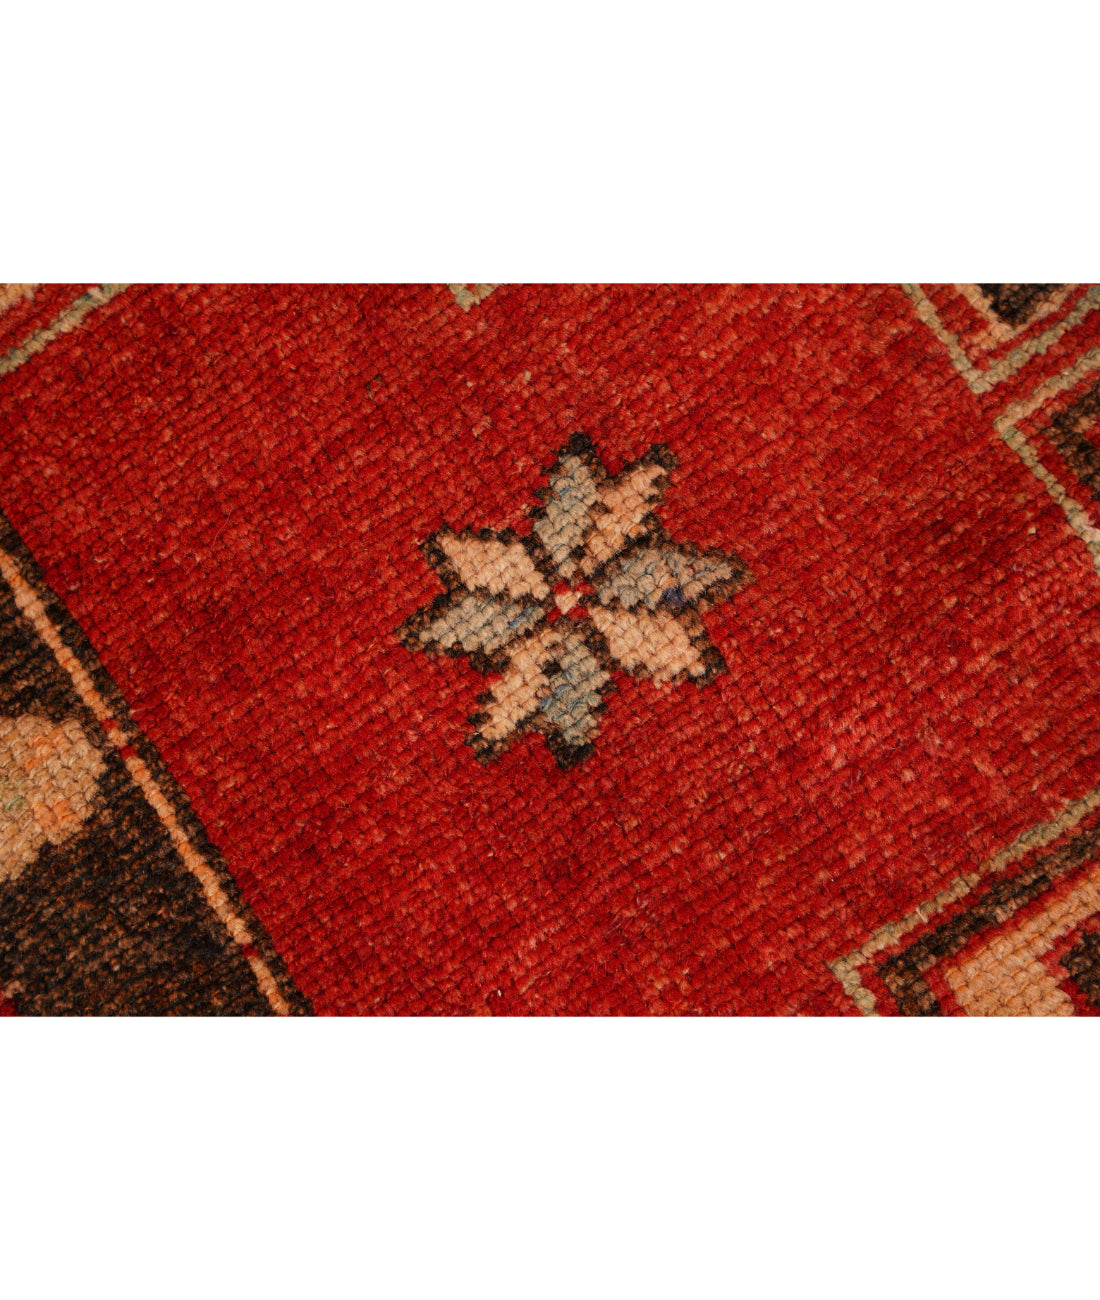 Anatolian 3' 7" X 12' 2" Hand-Knotted Wool Rug 3' 7" X 12' 2" (109 X 371) / Red / Brown